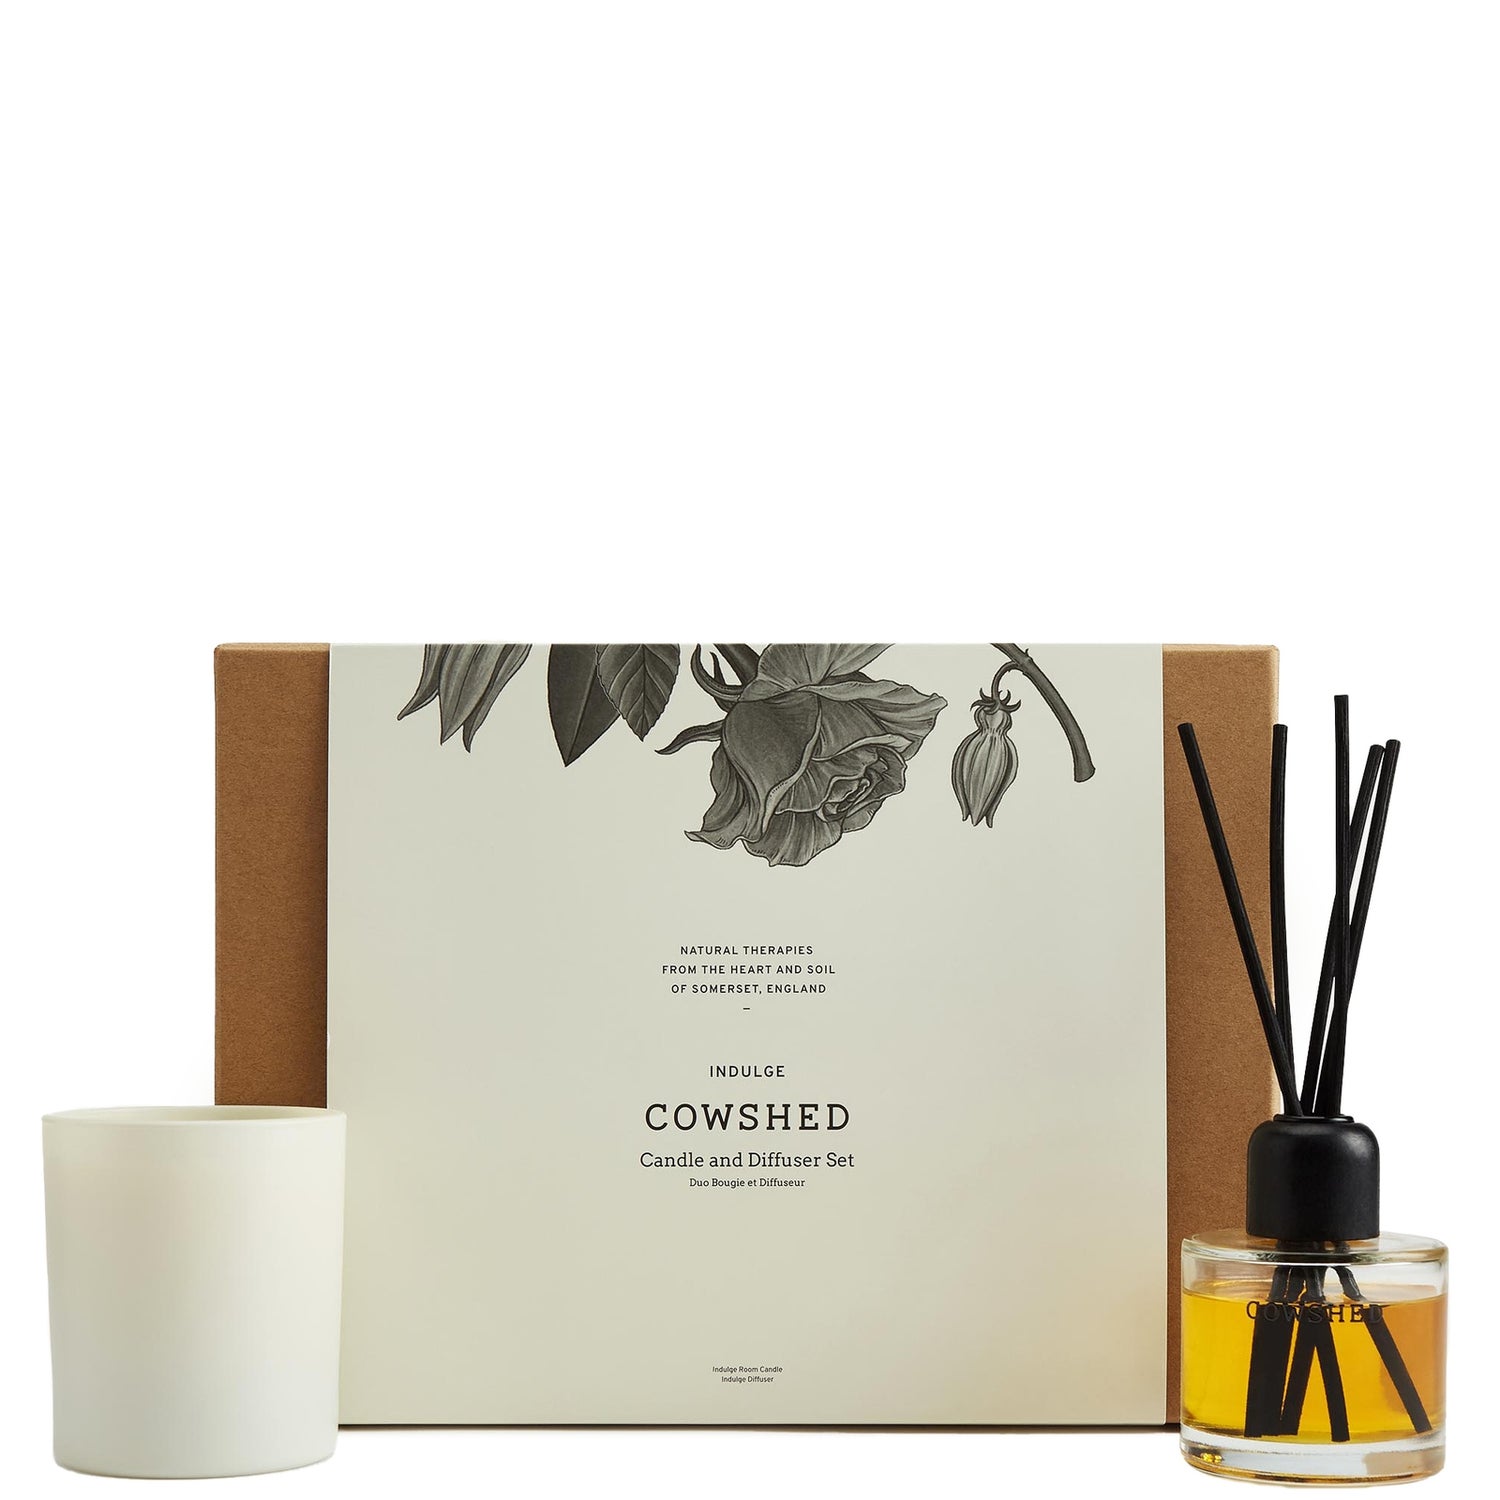 Cowshed Candle and Diffuser Set - Indulge